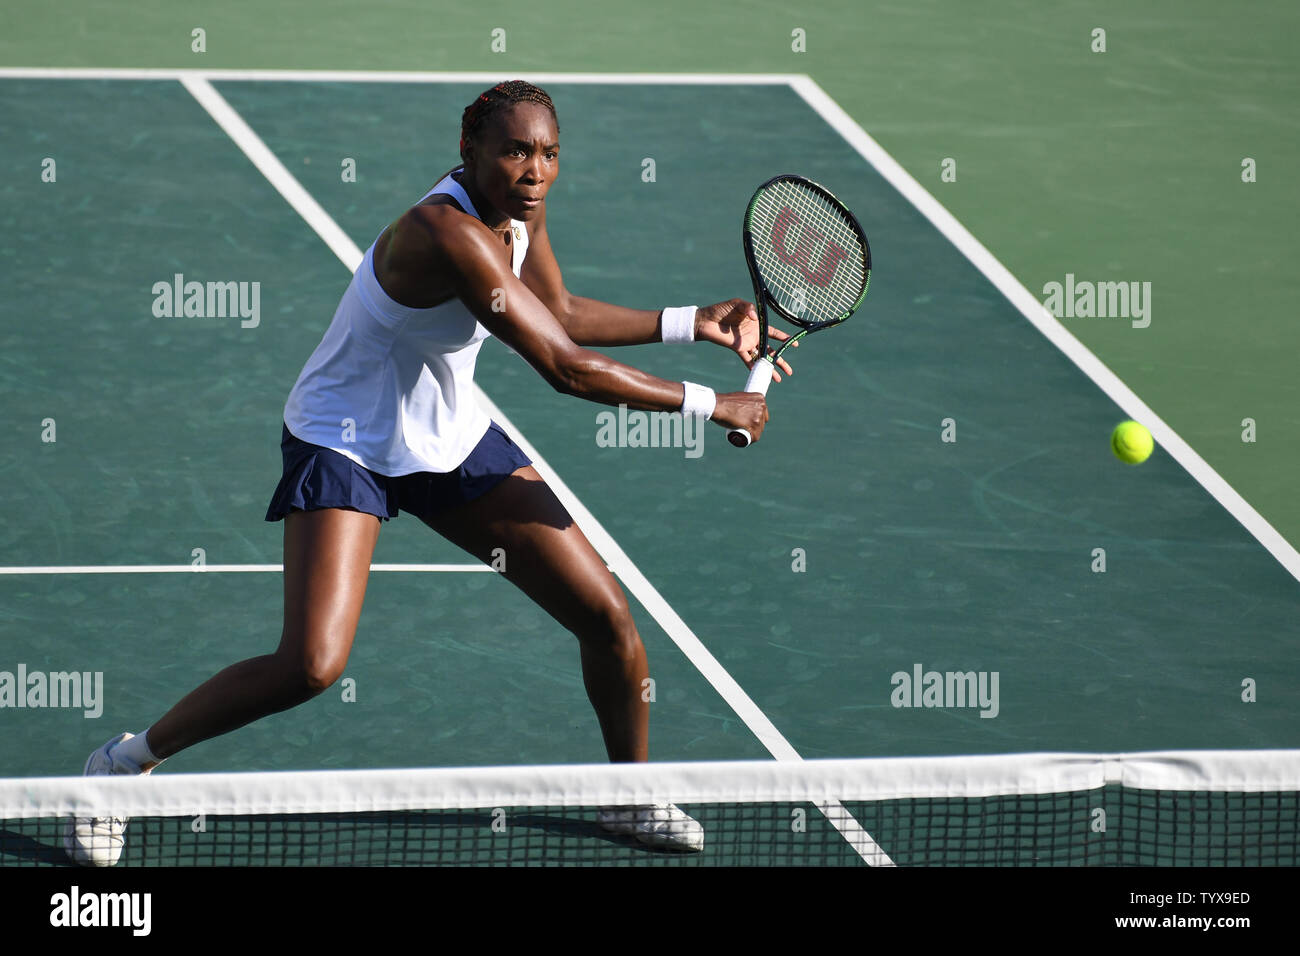 Venus Williams of the United States returns a volley during the Mixed Doubles Gold Medal Tennis Match at the Olympic Tennis Stadium at the 2016 Rio Summer Olympics in Rio de Janeiro, Brazil, on August 14, 2016.            Photo by Richard Ellis/UPI.. Stock Photo